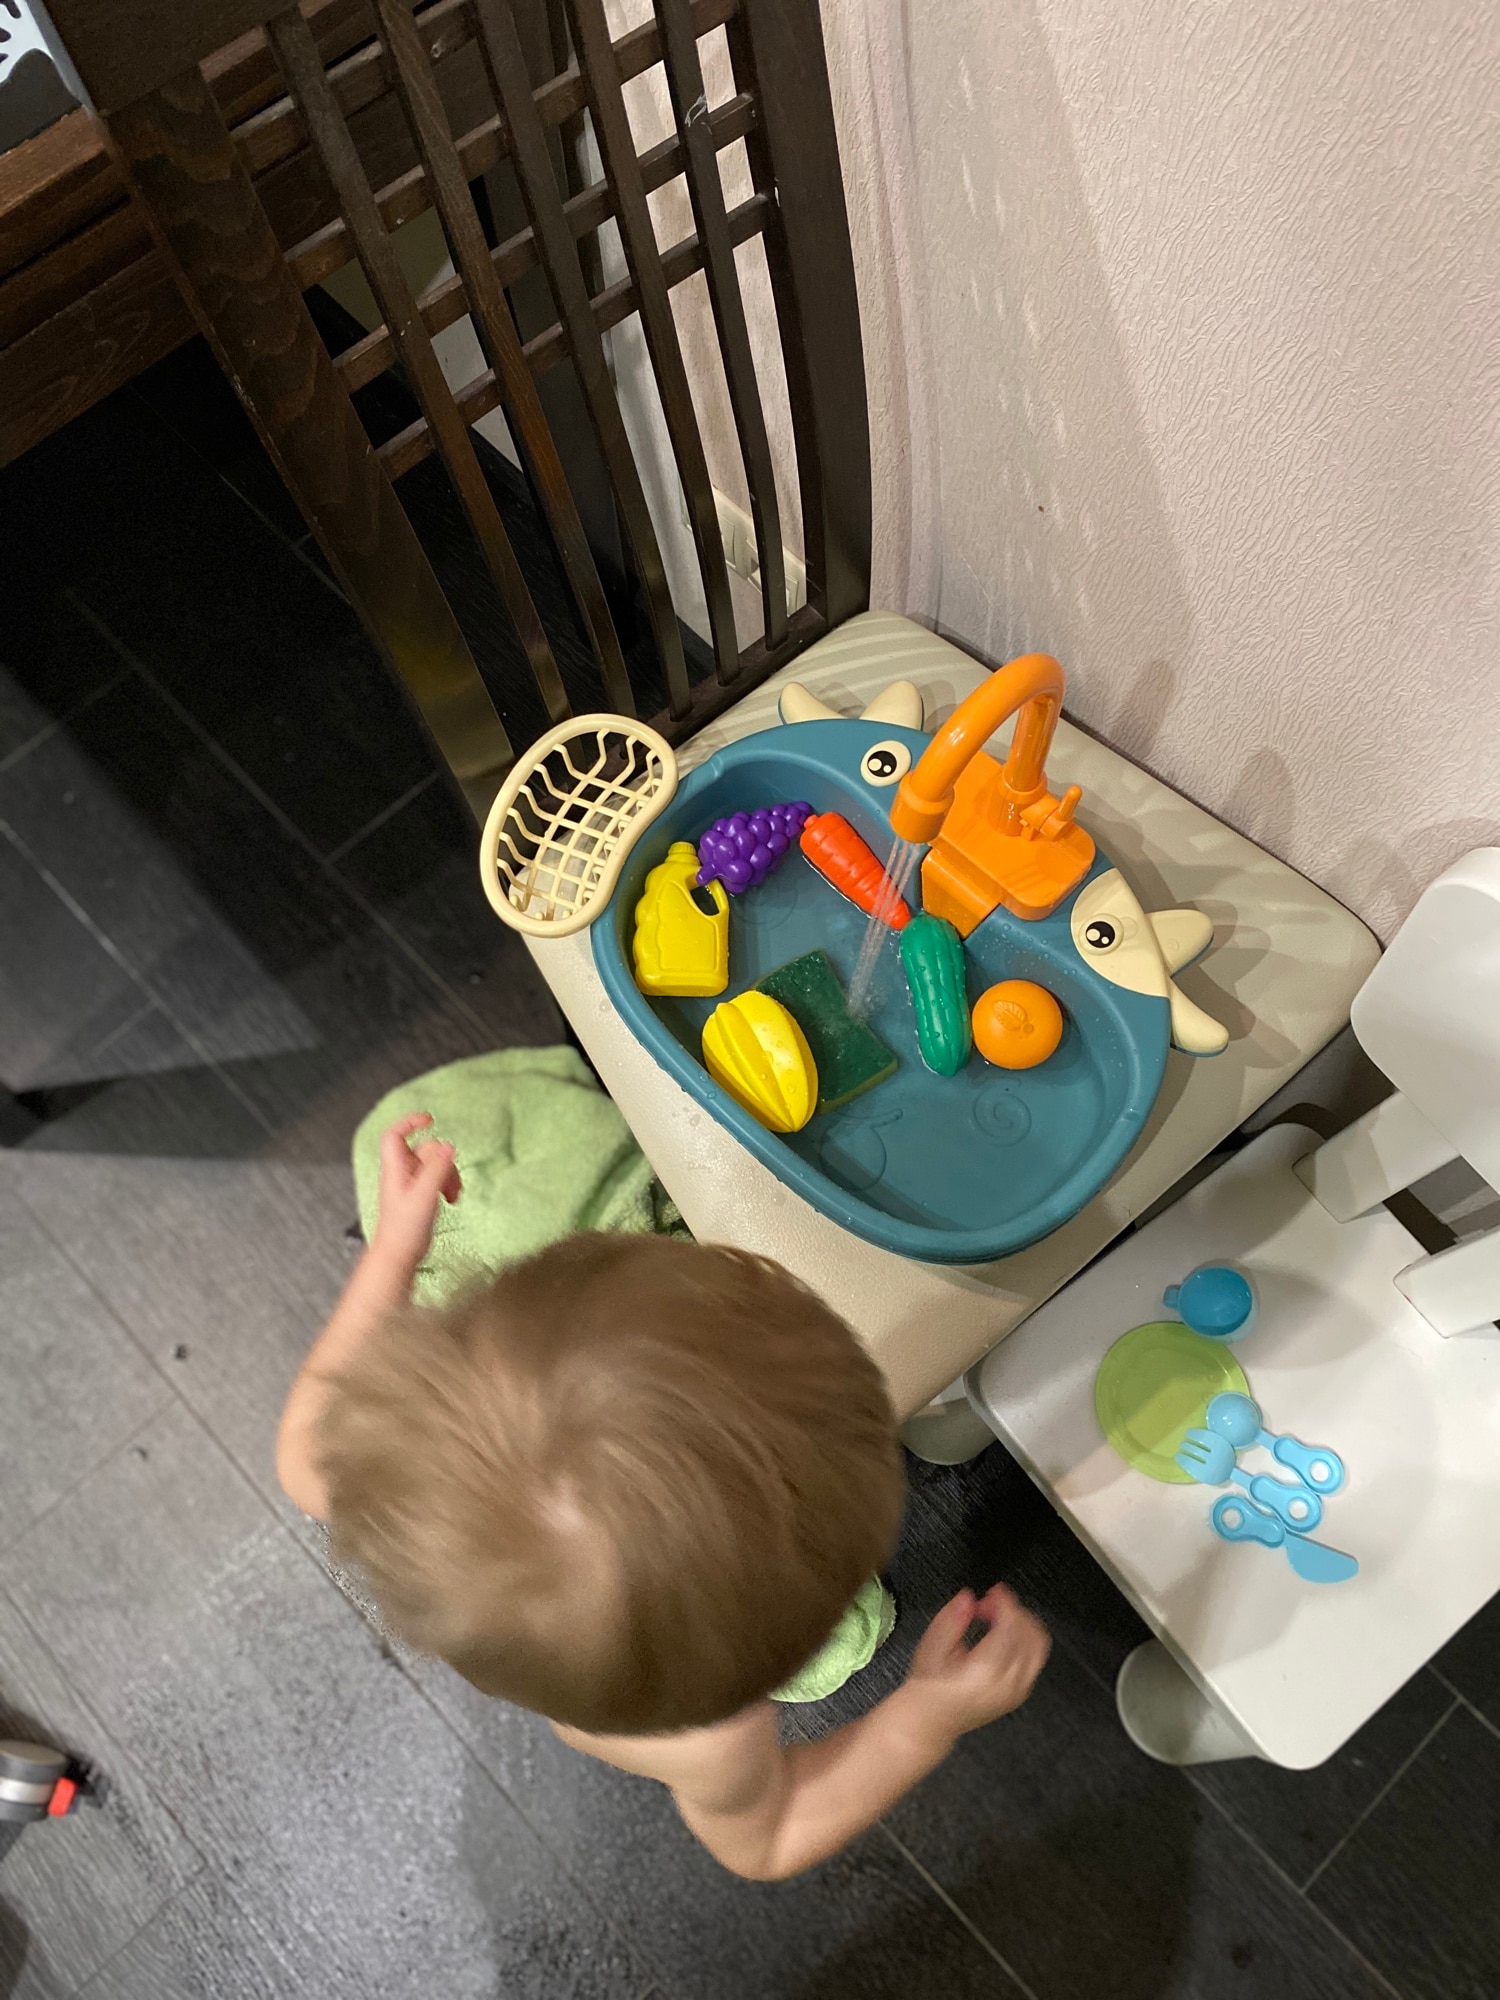 Kitchen Simulation Sink, Children’s Educational Toy photo review